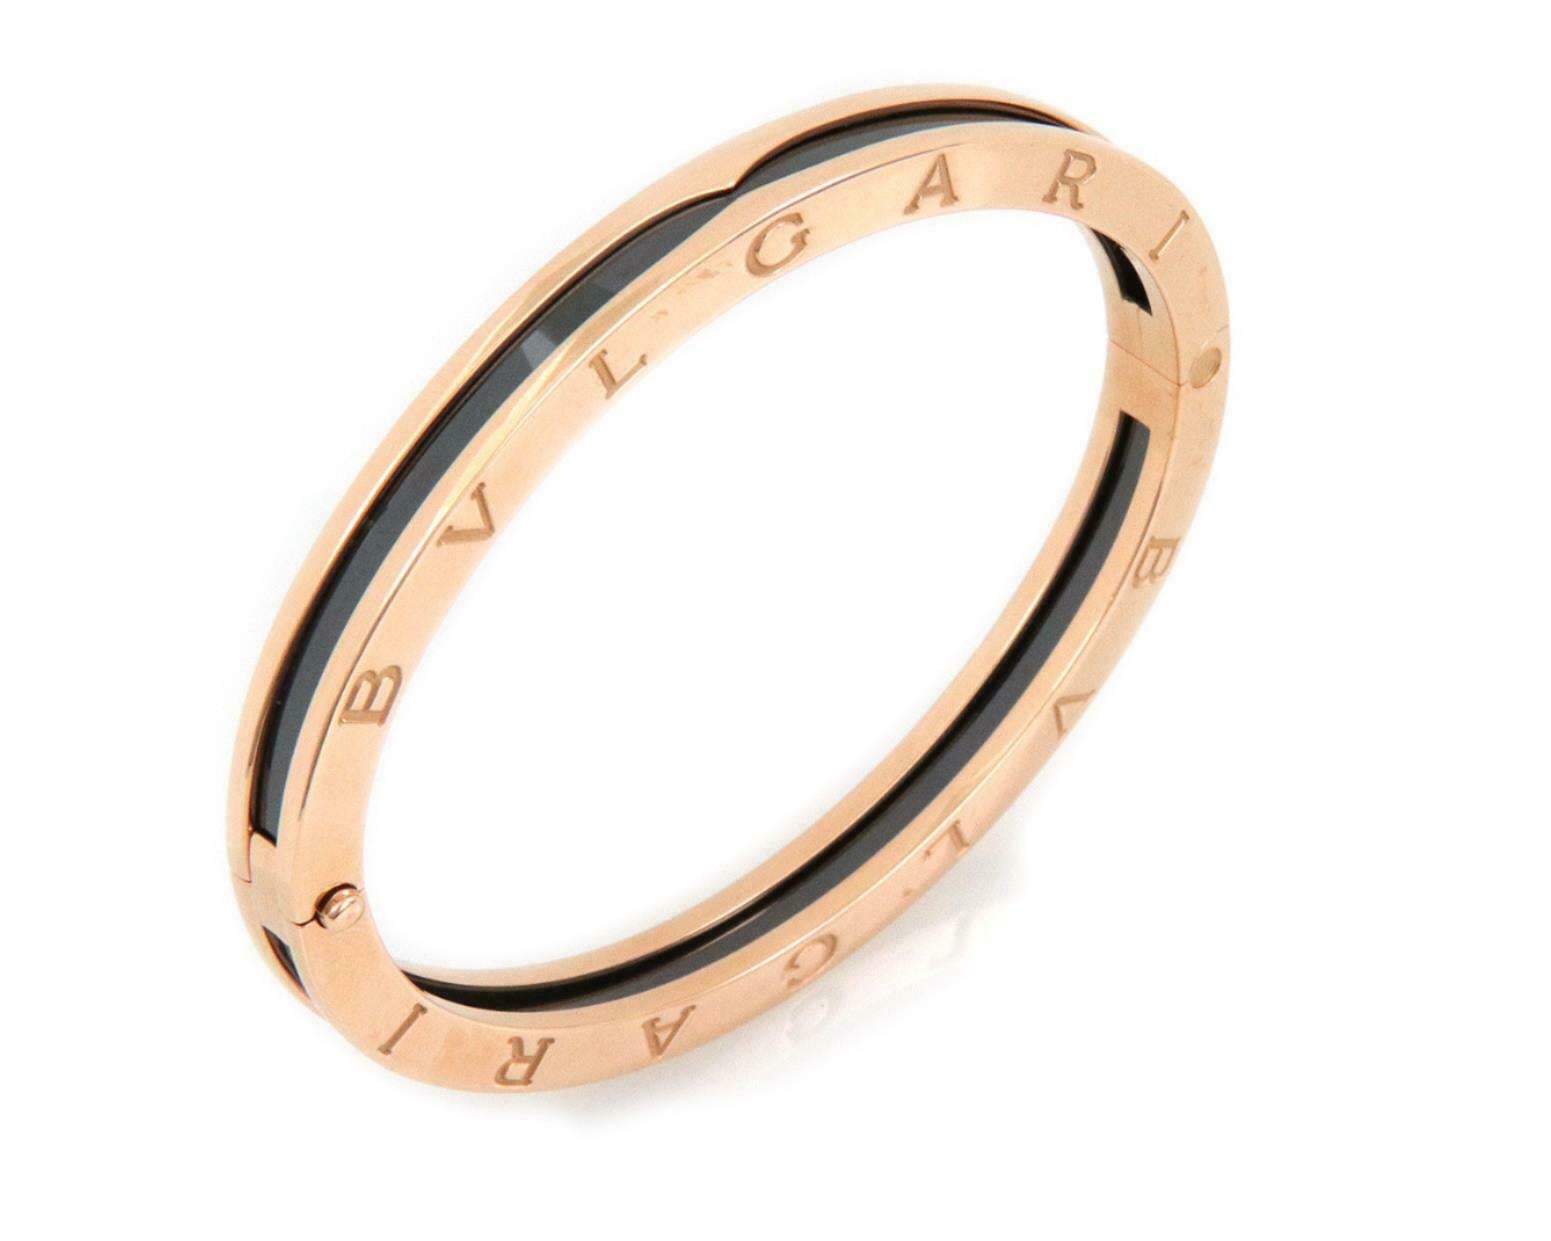 Sophisticated and authentic by Bvlgari from the B.zero1 Collection. This gorgeous hinged bracelet is crafted from 18k rose gold with black ceramic featuring an oval shape bangle, the hinge is on one side with slide clasp on the other side, but flat